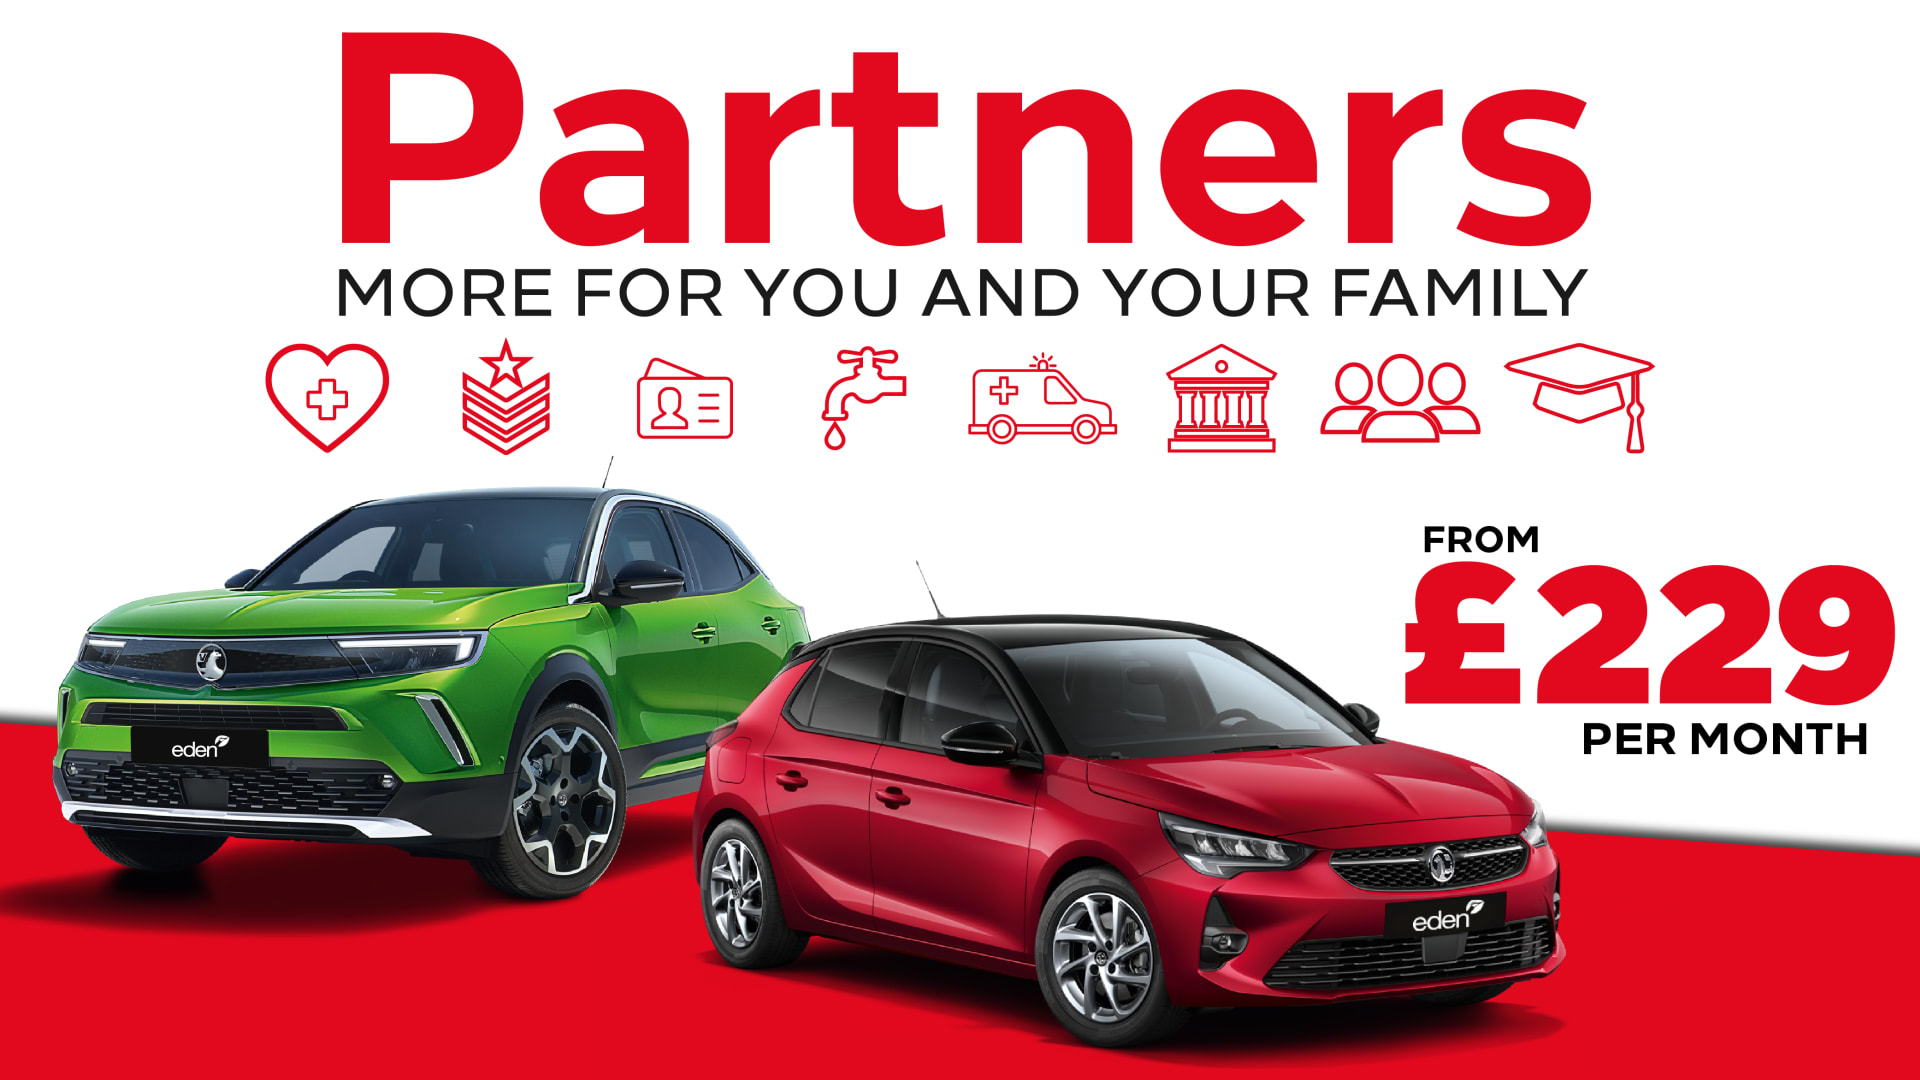 Partners Offers